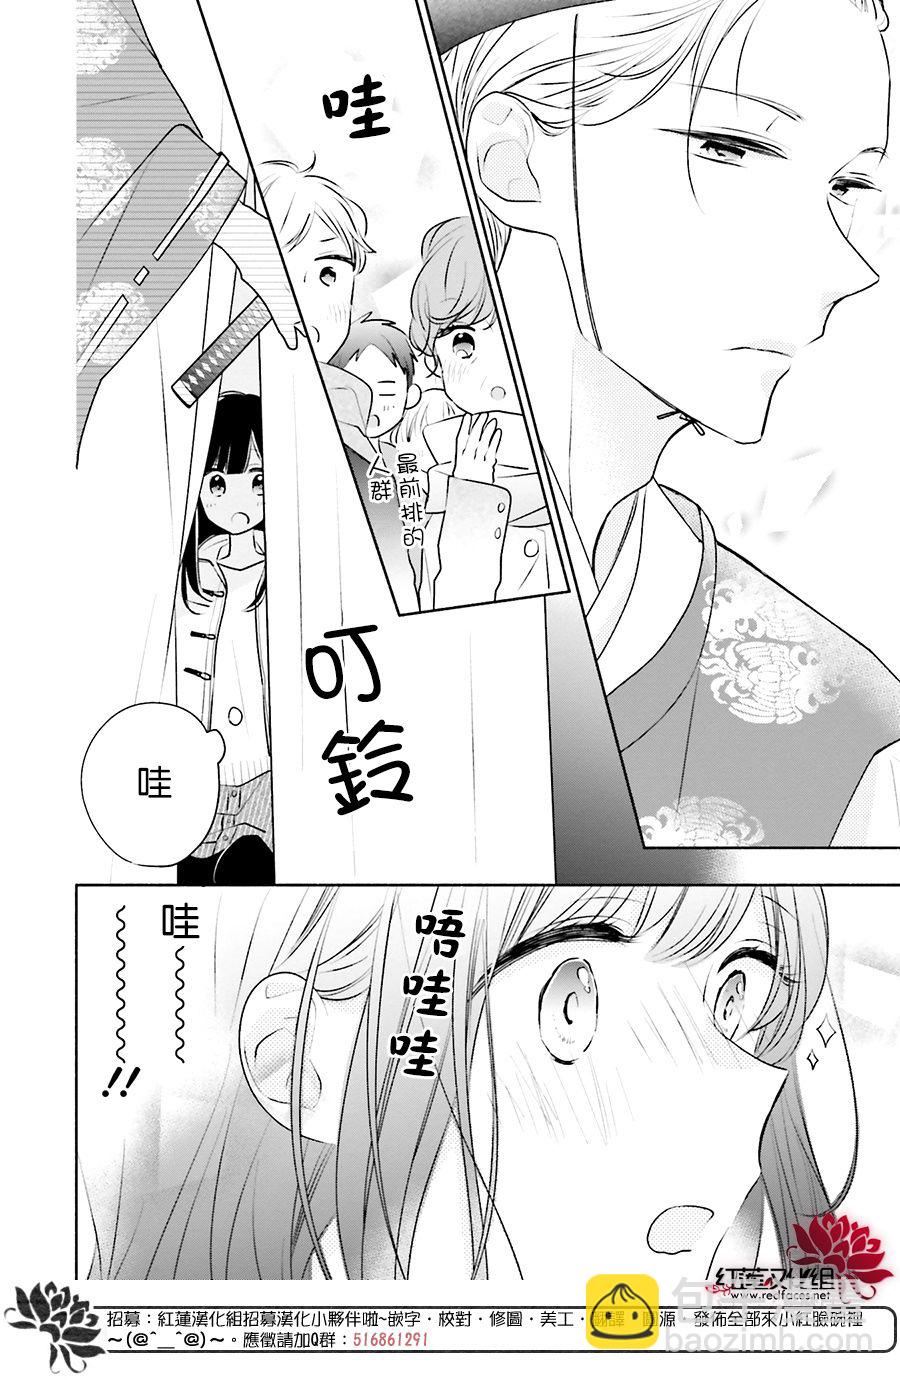 If given a second chance - 27話 - 4